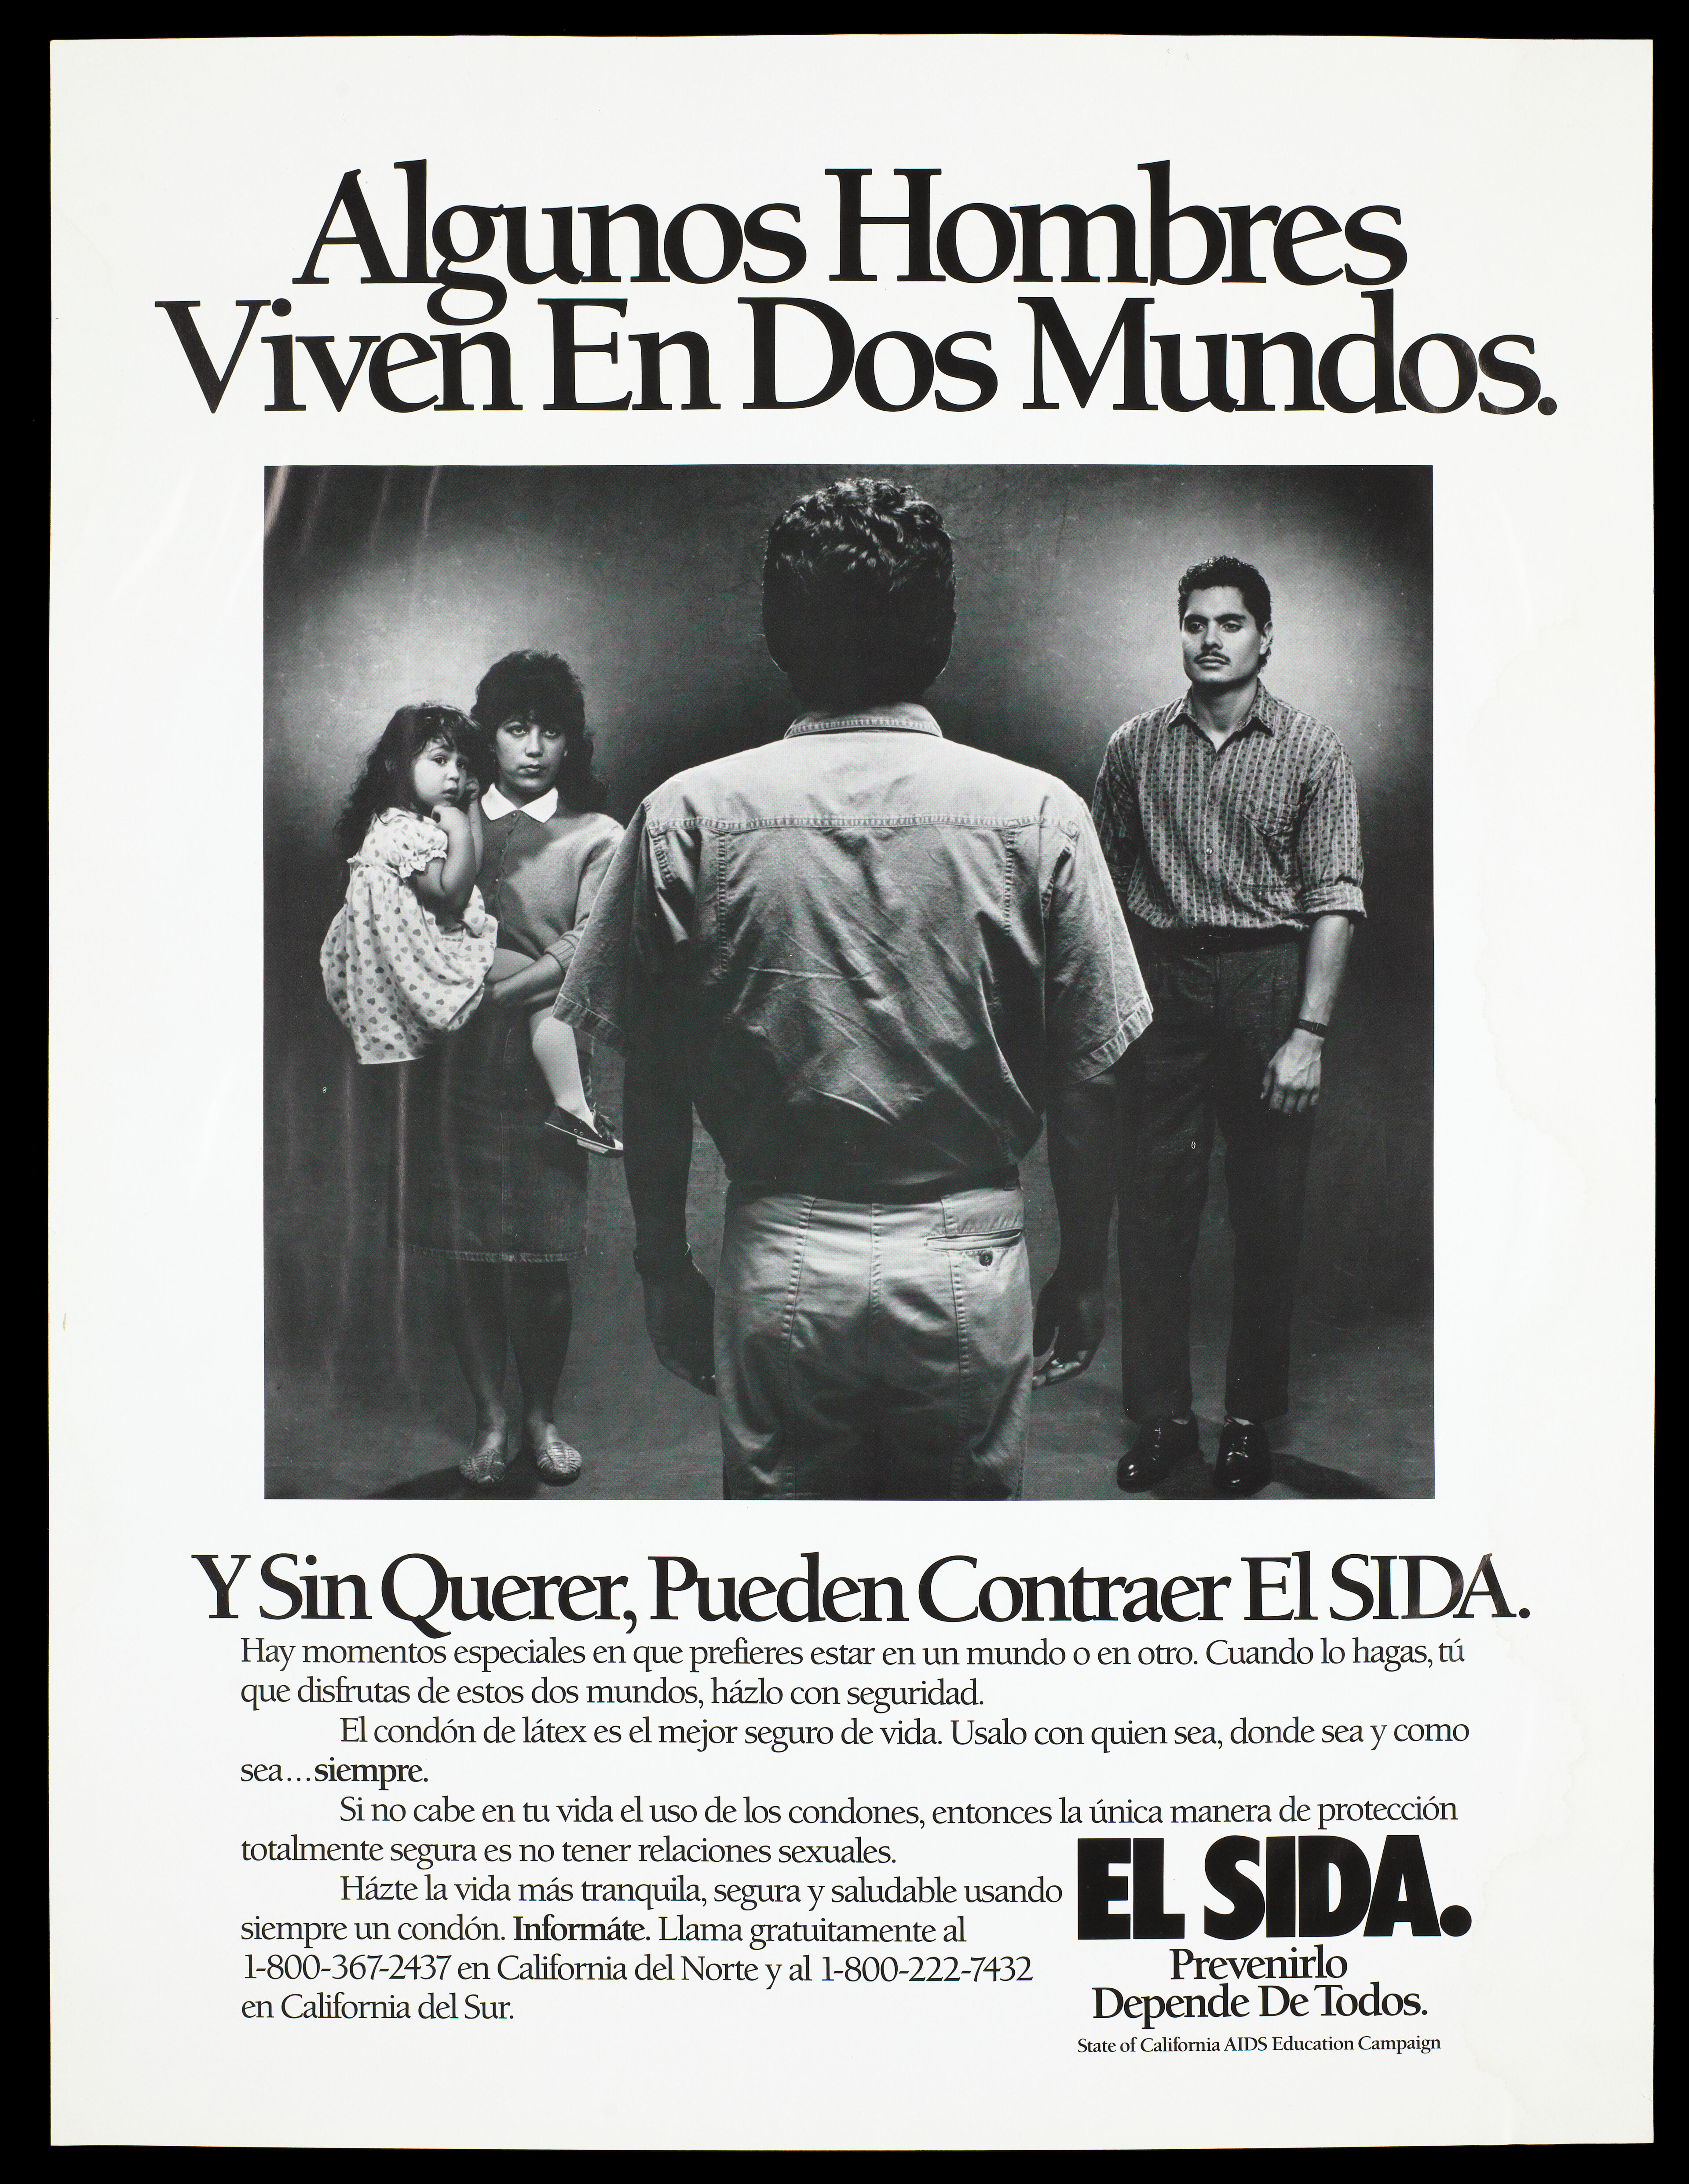 A man with his back turned looks at a woman and child on his left and another man to his right; warning to bisexual men about the risk of contracting AIDS; advertisement by the State of California AIDS Education Campaign. Lithograph.